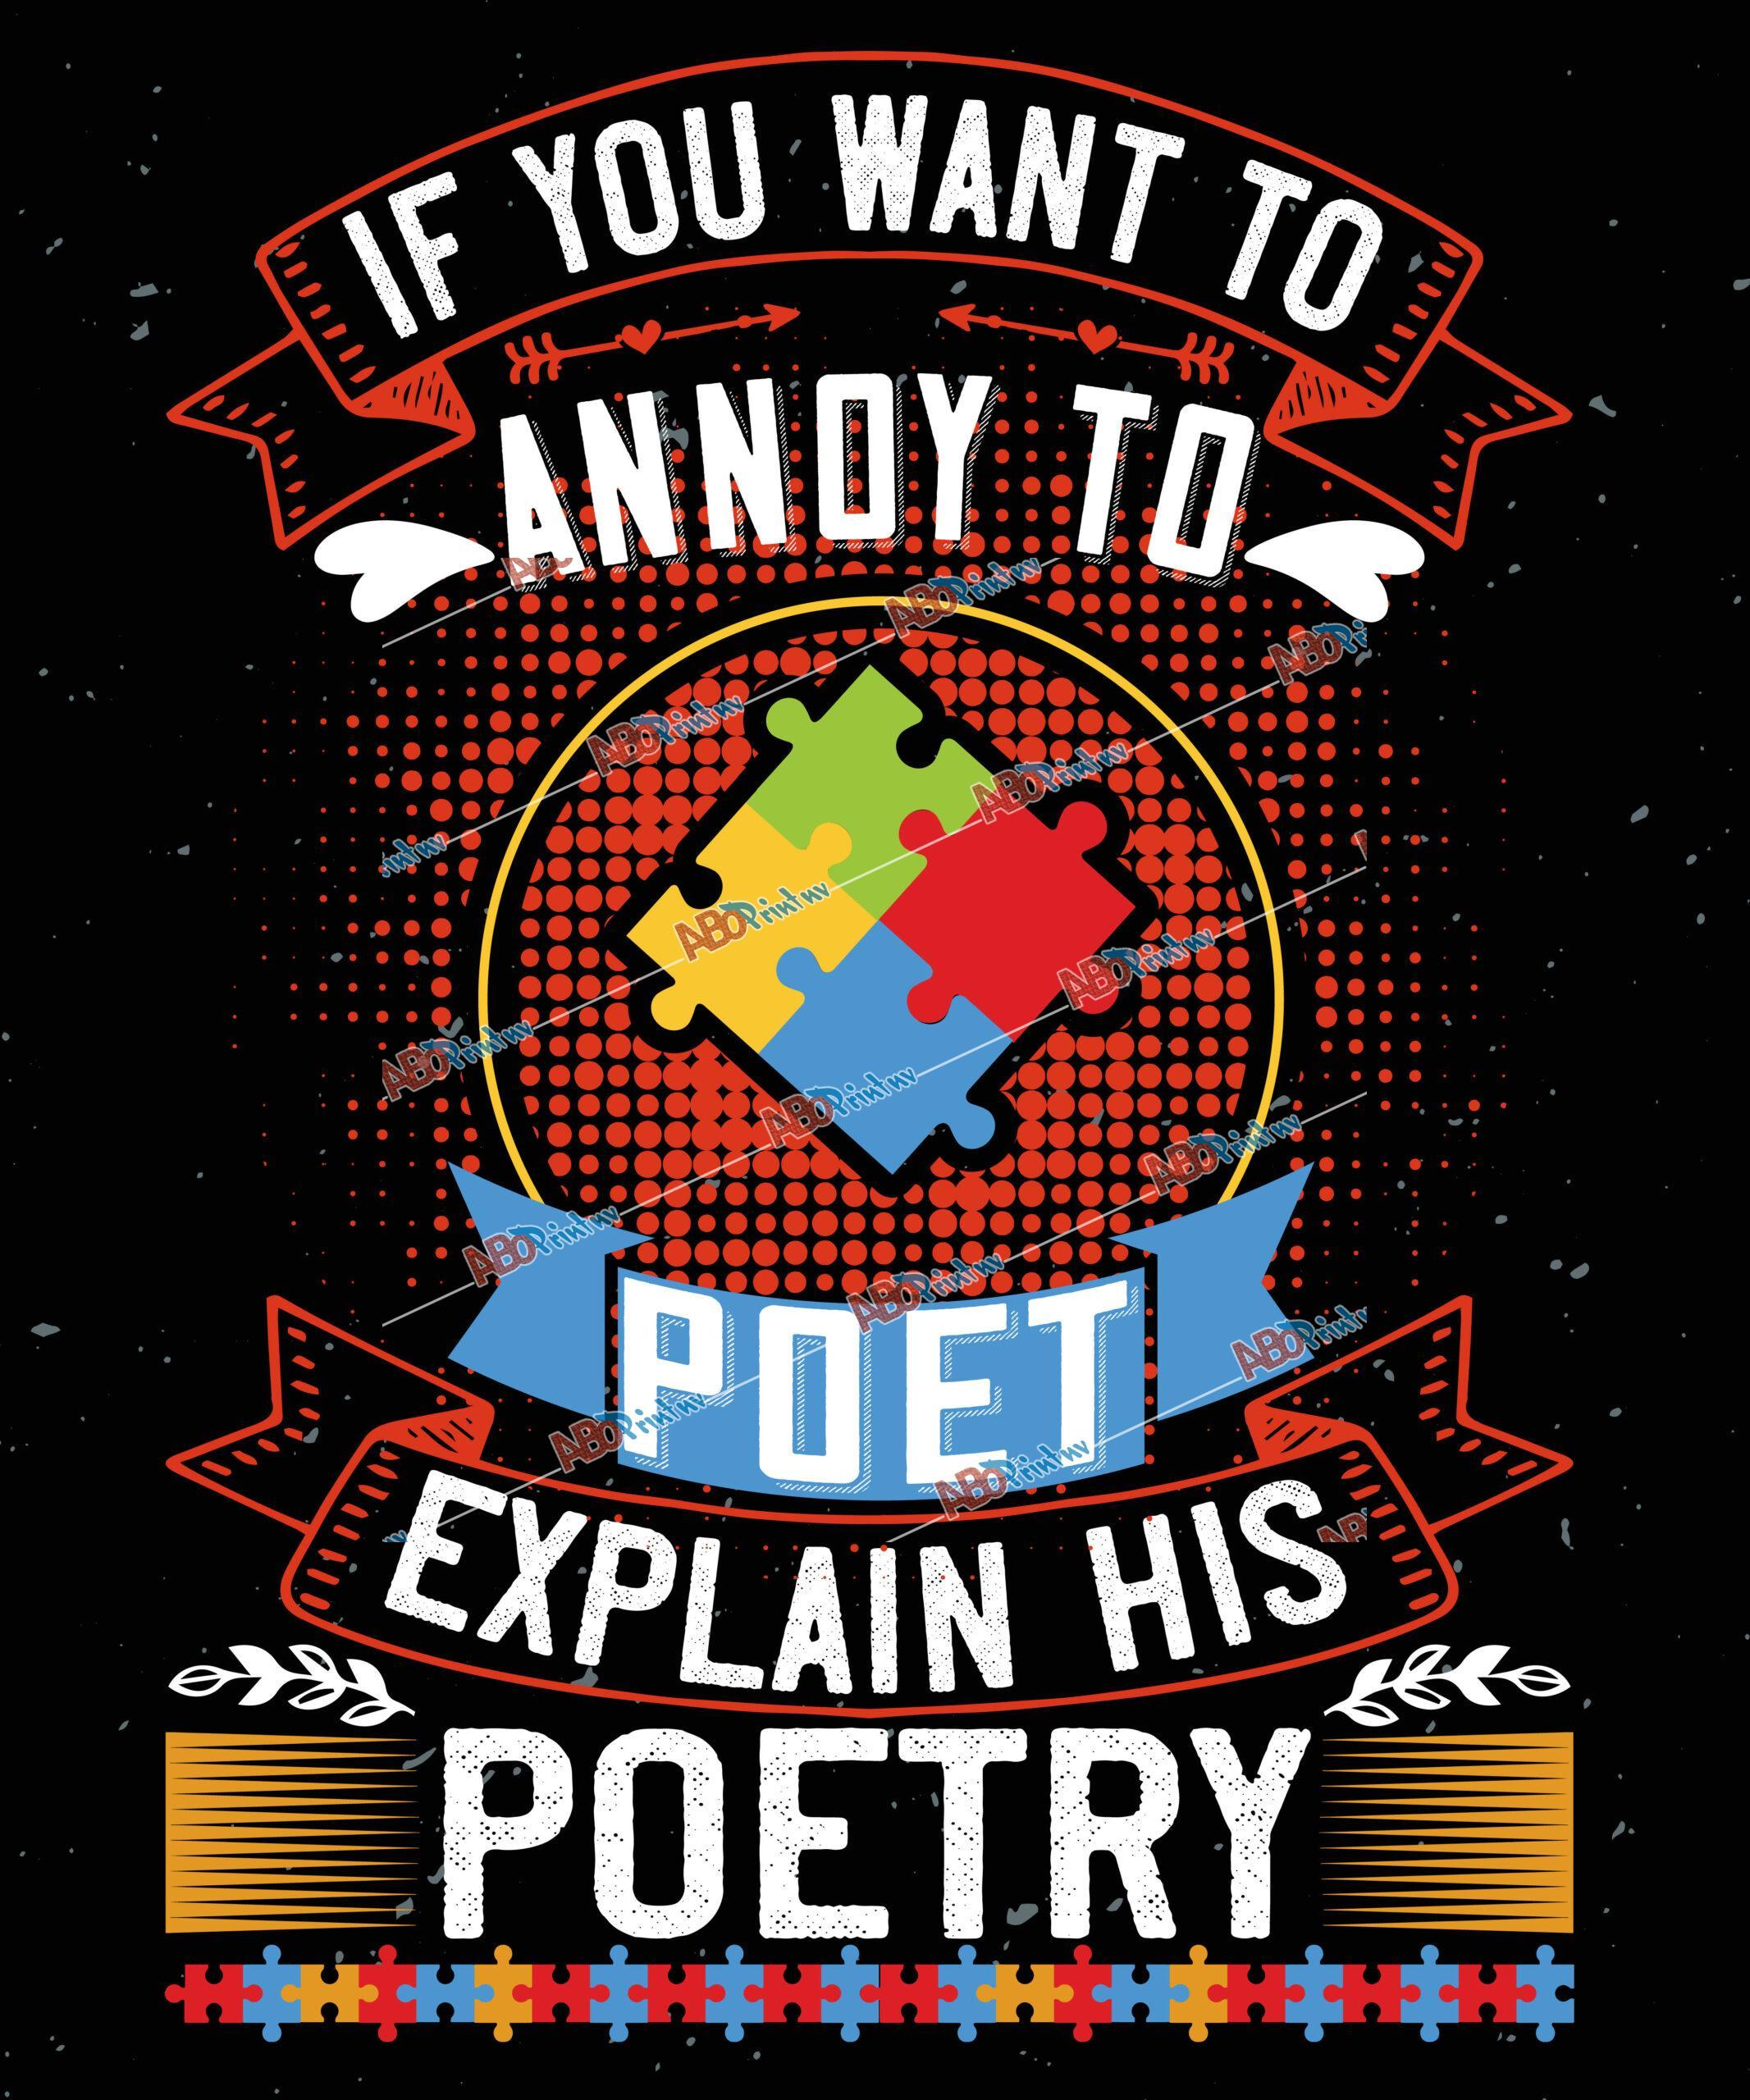 If you want to annoy a poet, explain his poetry